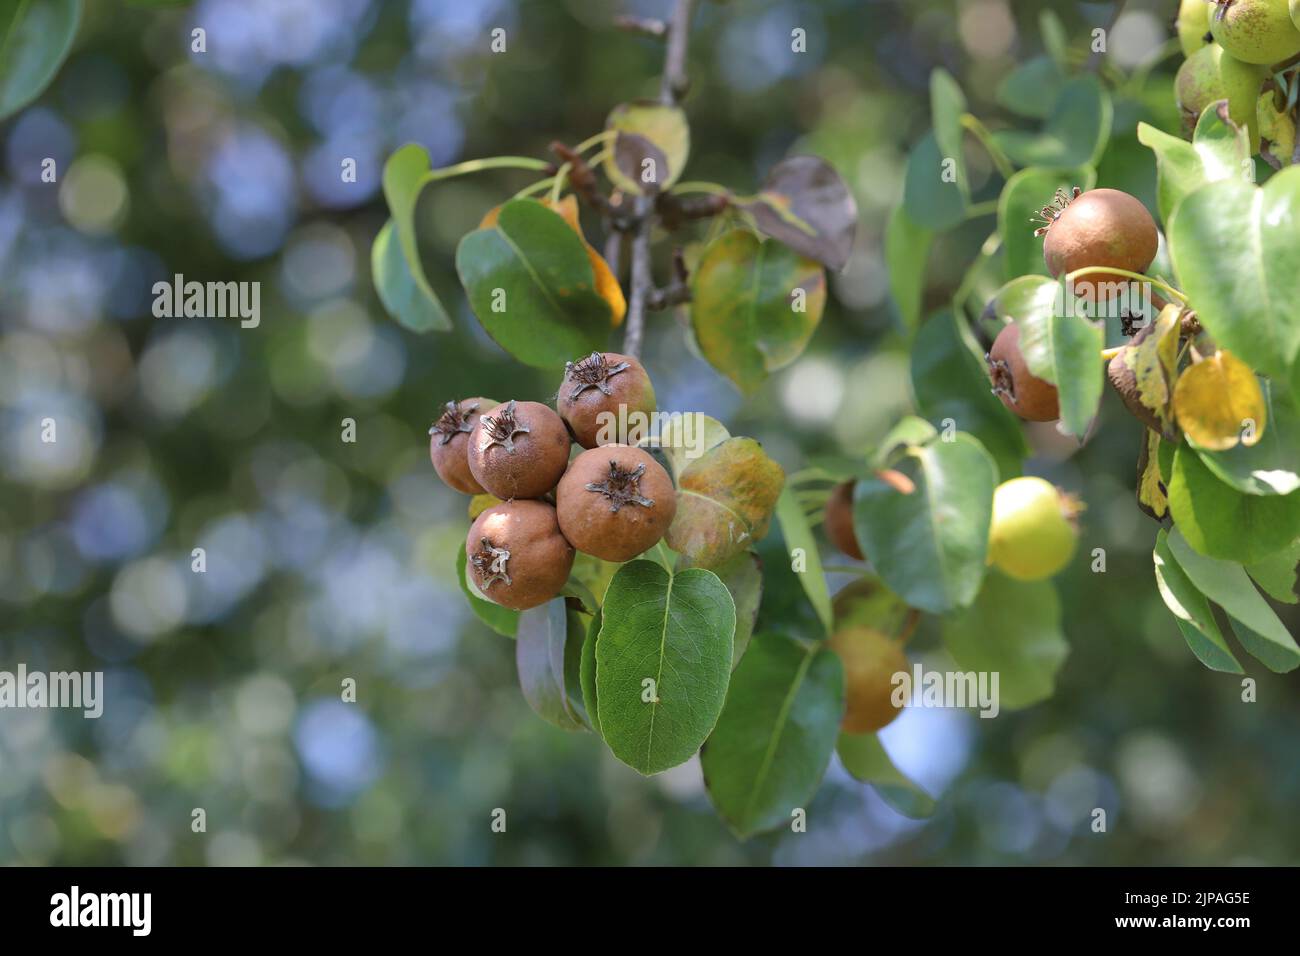 A rotting pear hanging on a tree on fruit tree in an orchard. Stock Photo